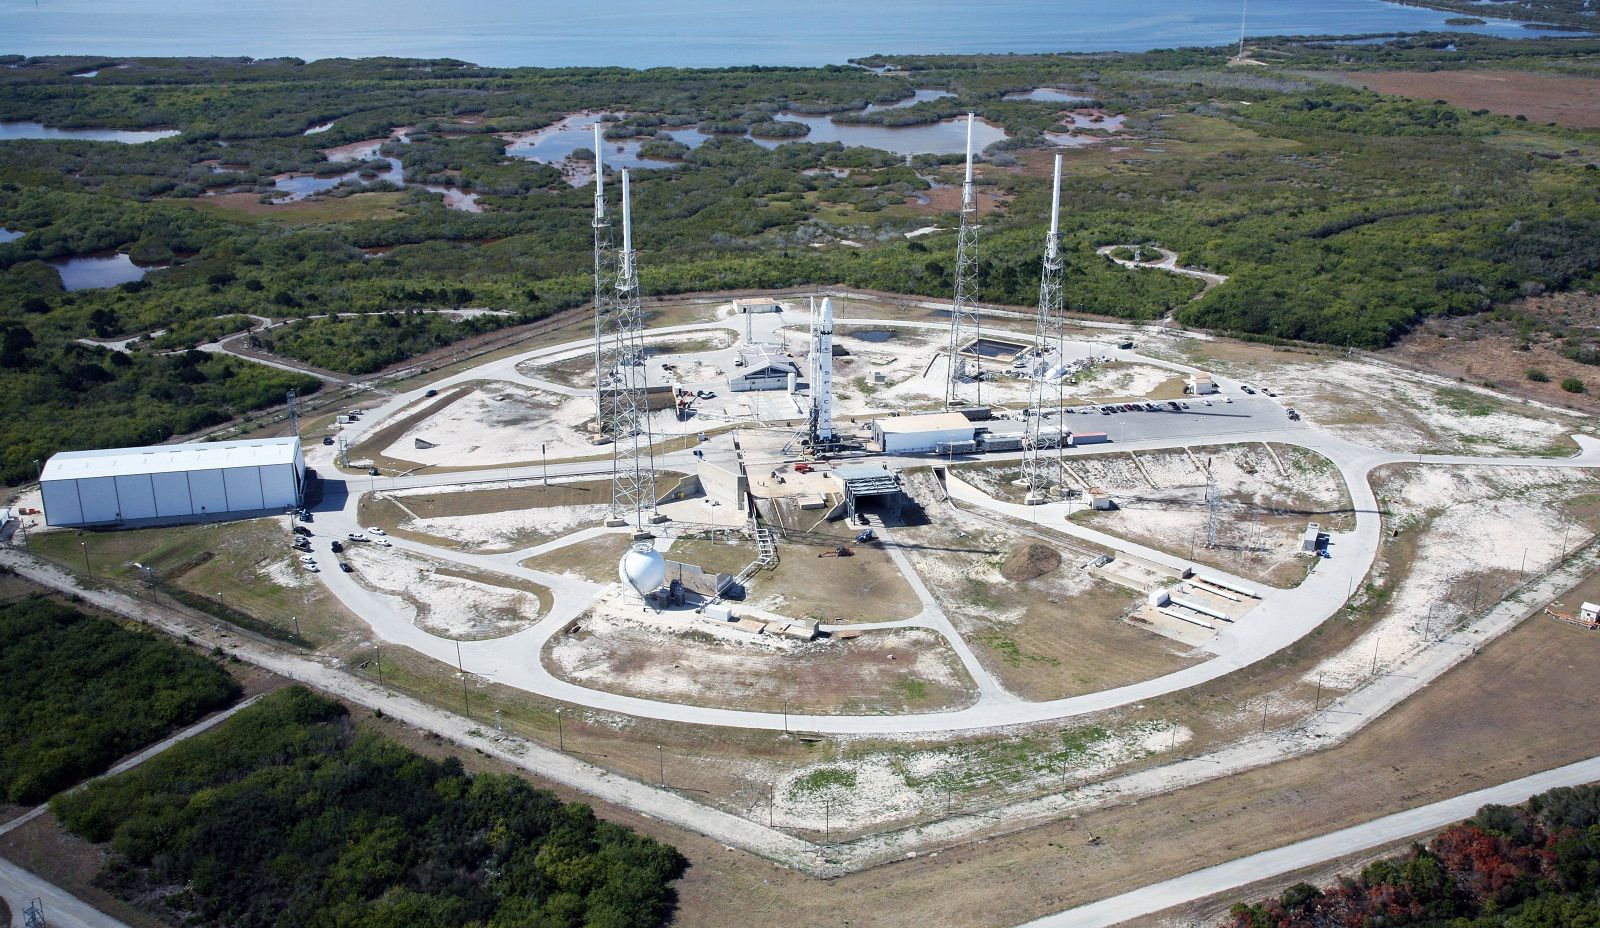 Space_Launch_Complex_40_at_Cape_Canaveral_(aerial)_1.jpg